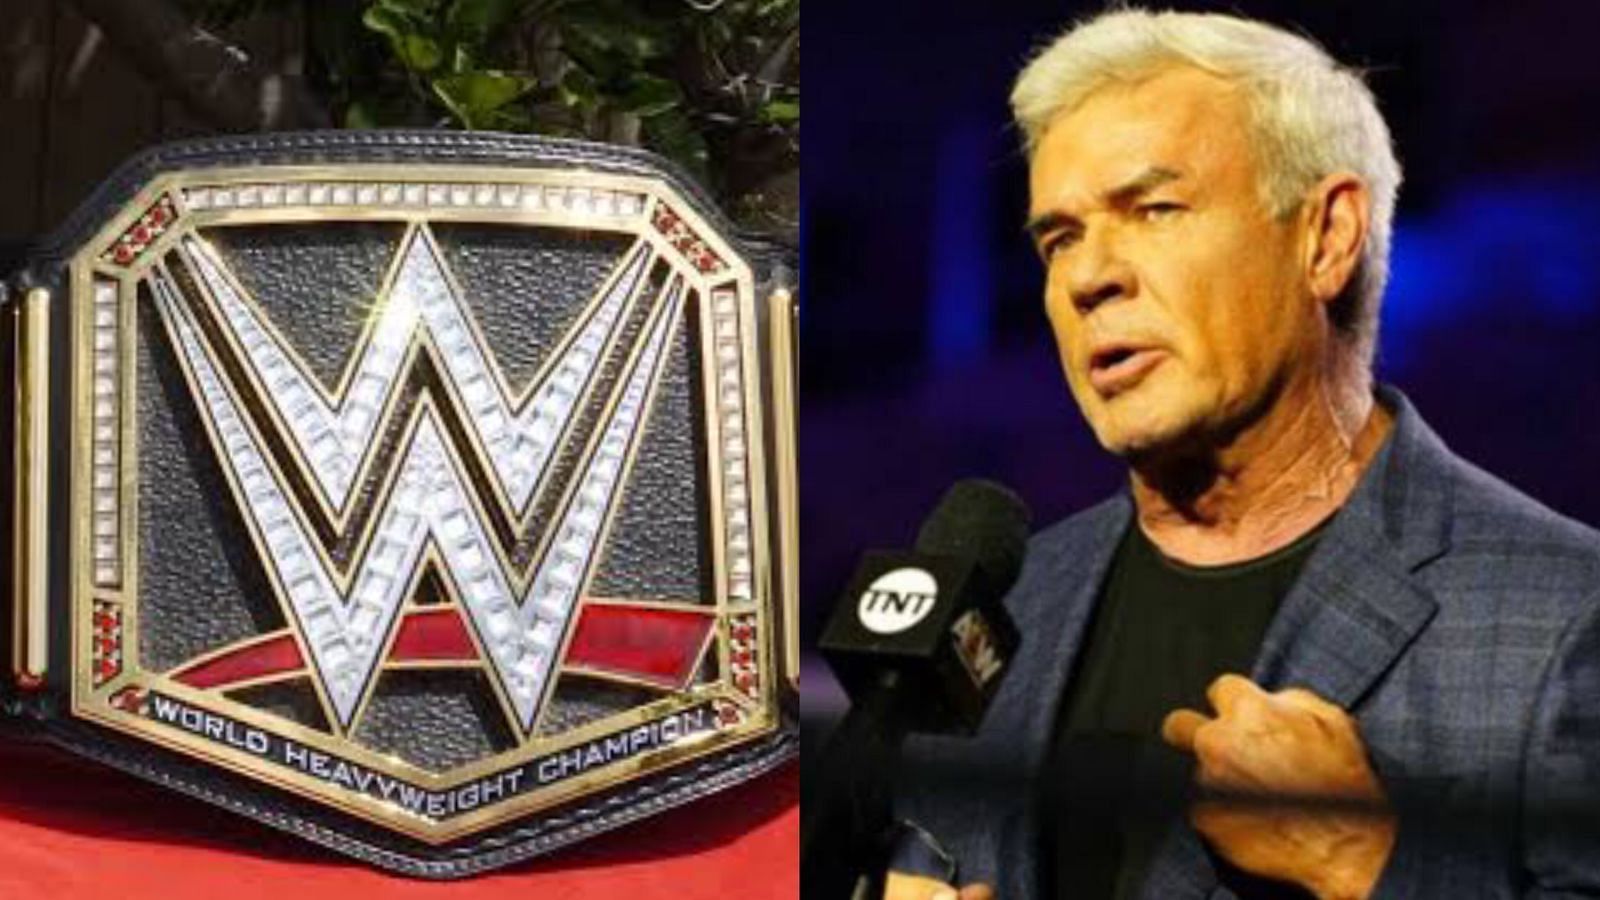 Eric Bischoff is the former general manager of WWE RAW